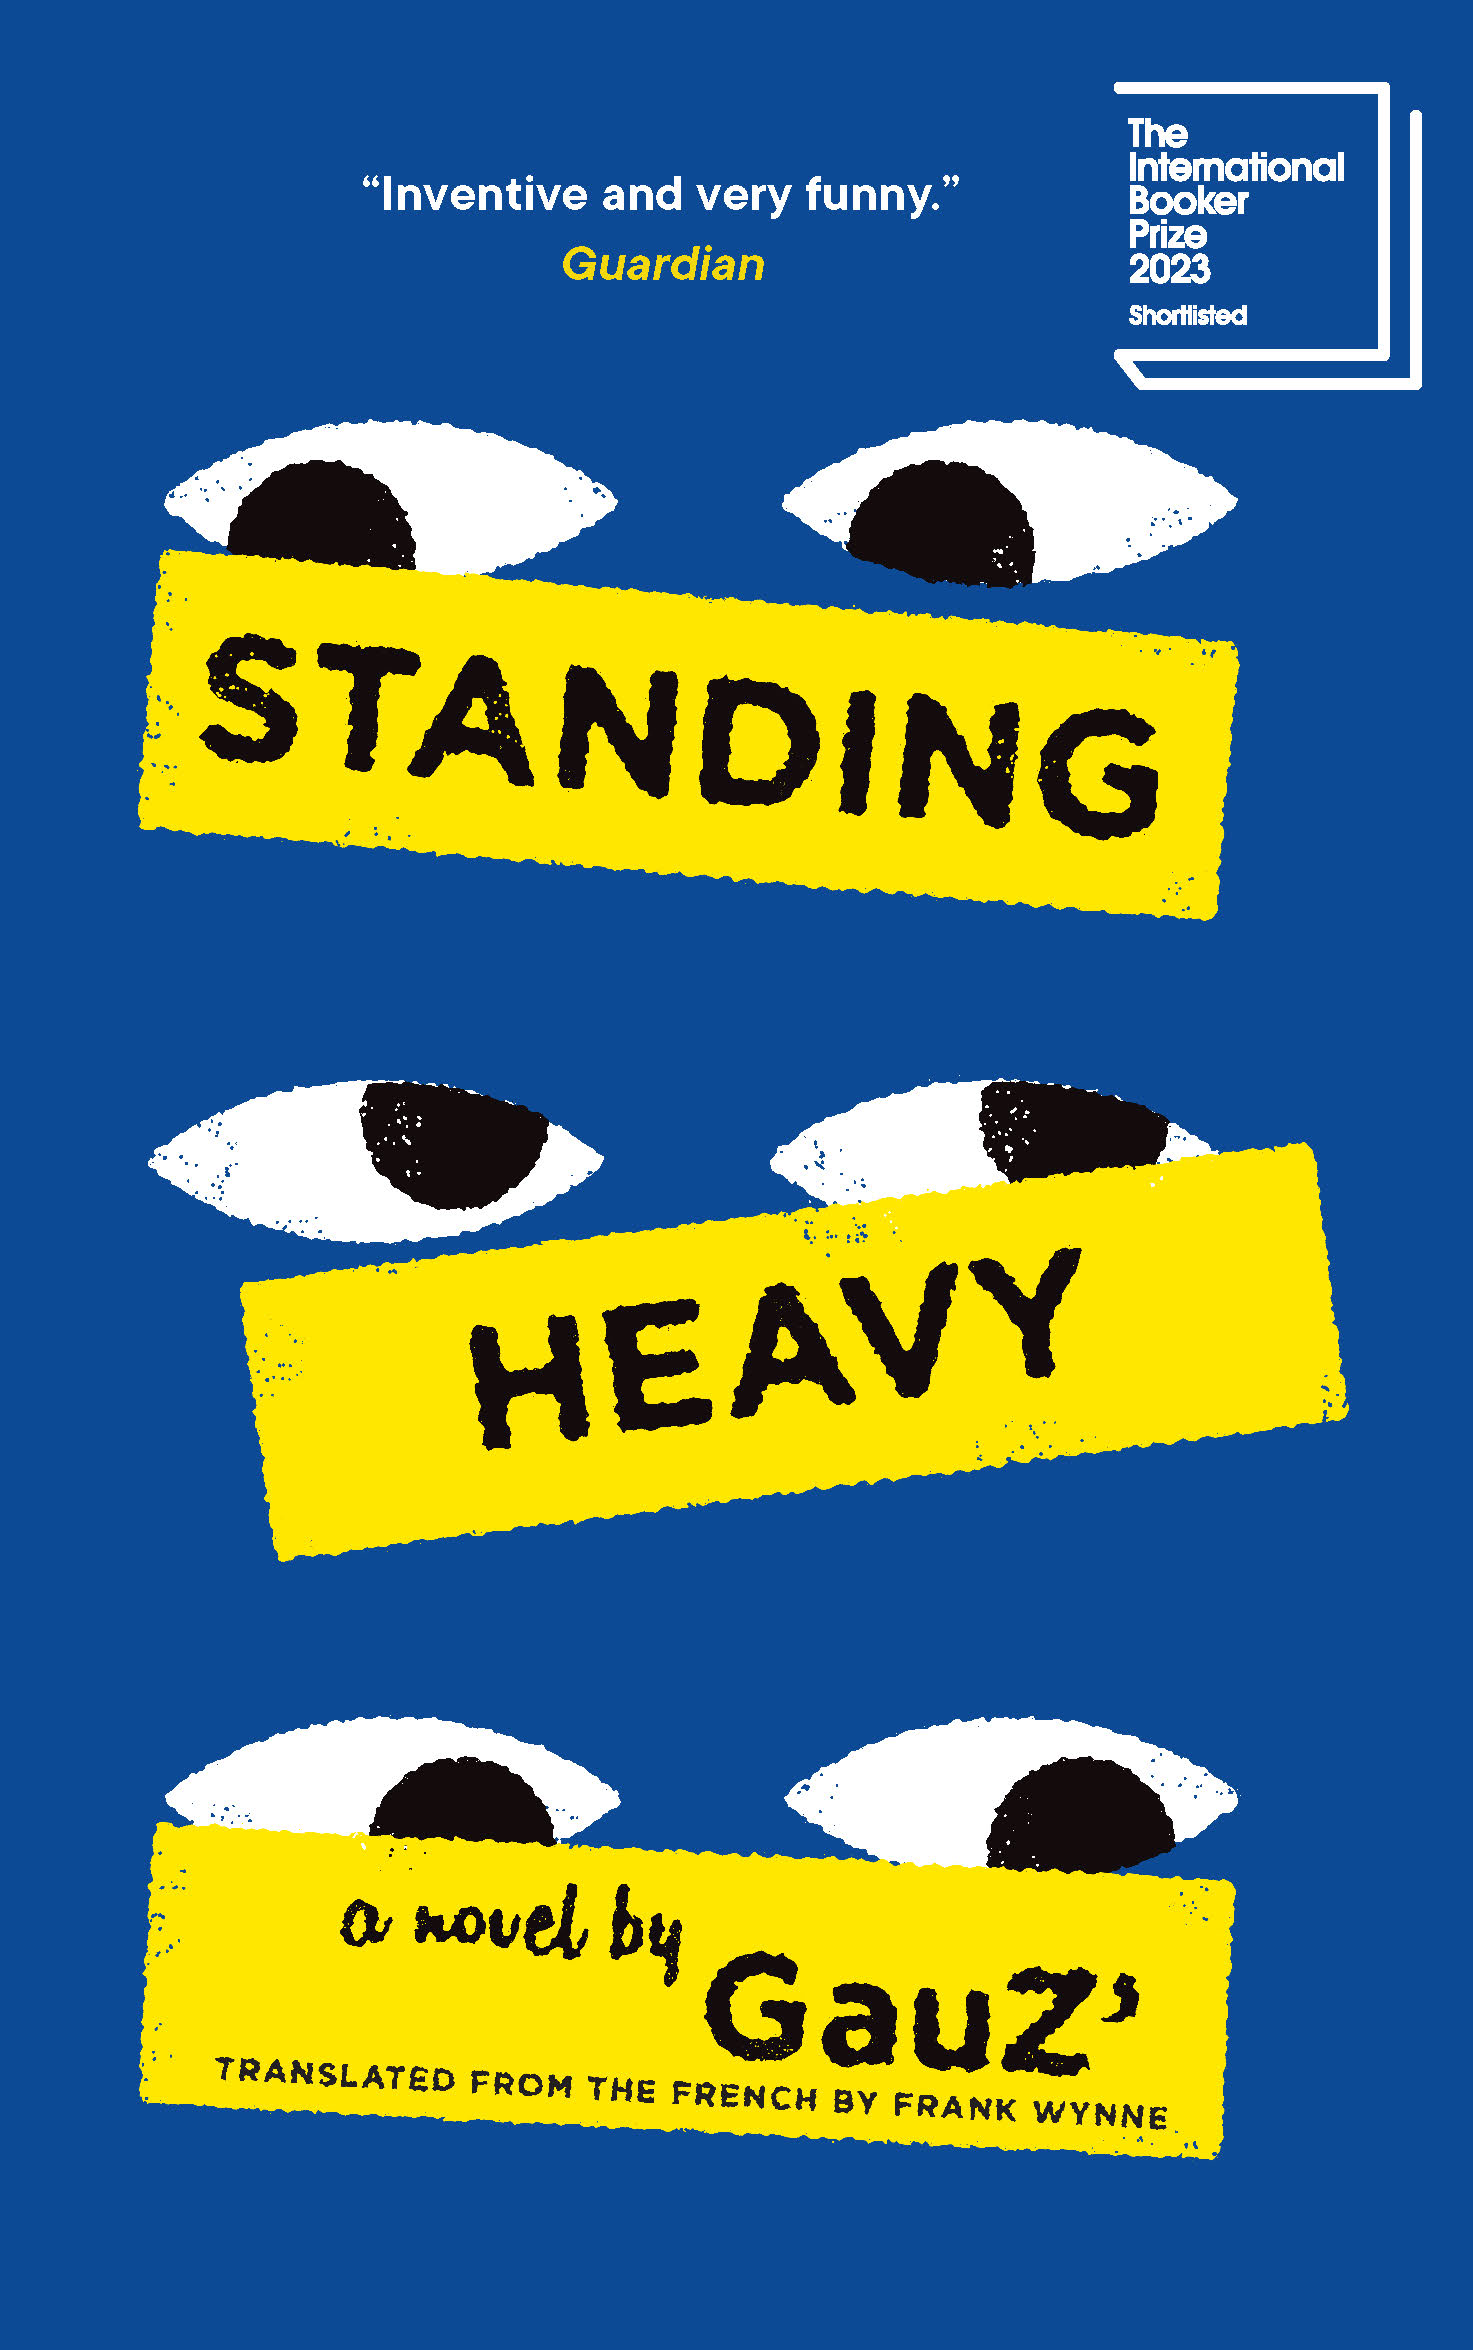 The cover of Standing Heavy by GauZ'